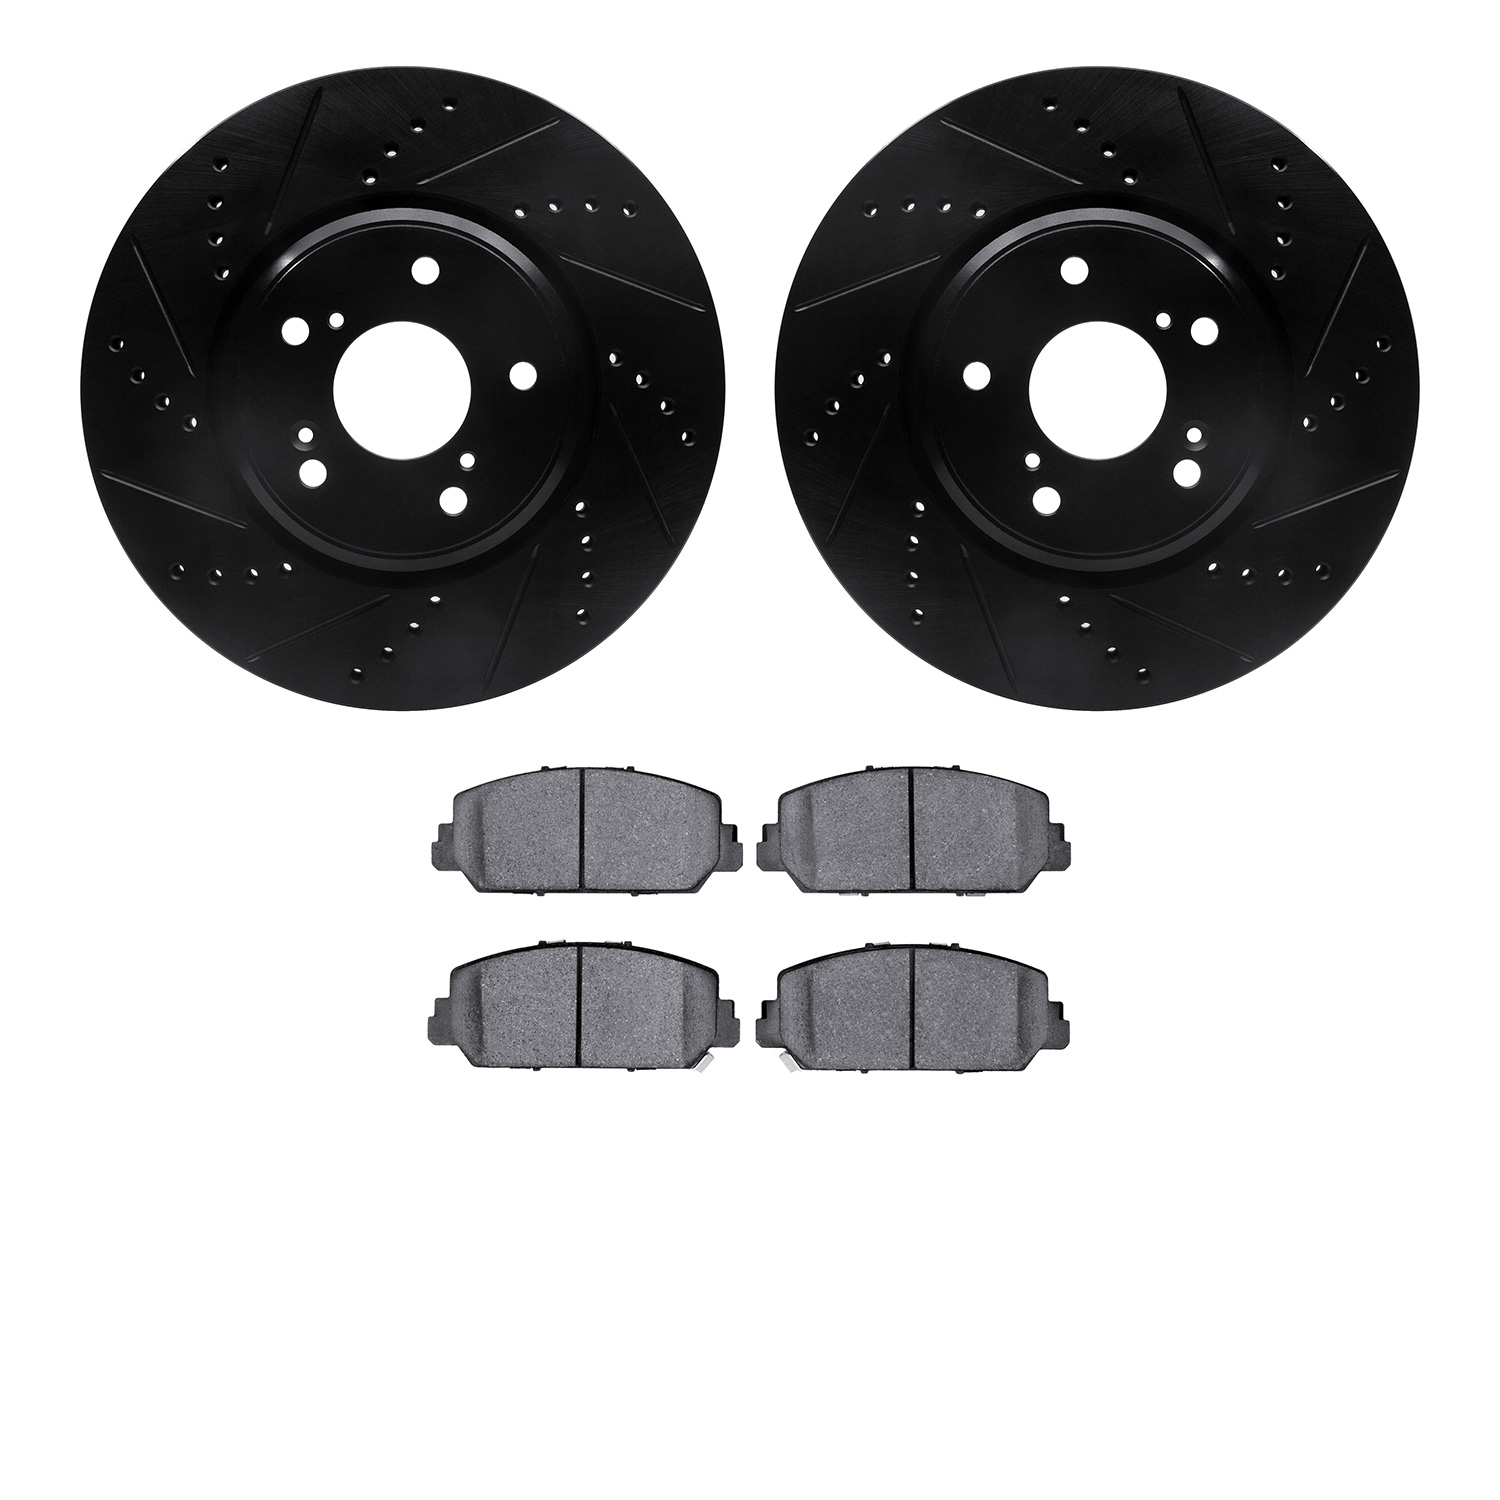 8302-59098 Drilled/Slotted Brake Rotors with 3000-Series Ceramic Brake Pads Kit [Black], Fits Select Acura/Honda, Position: Fron